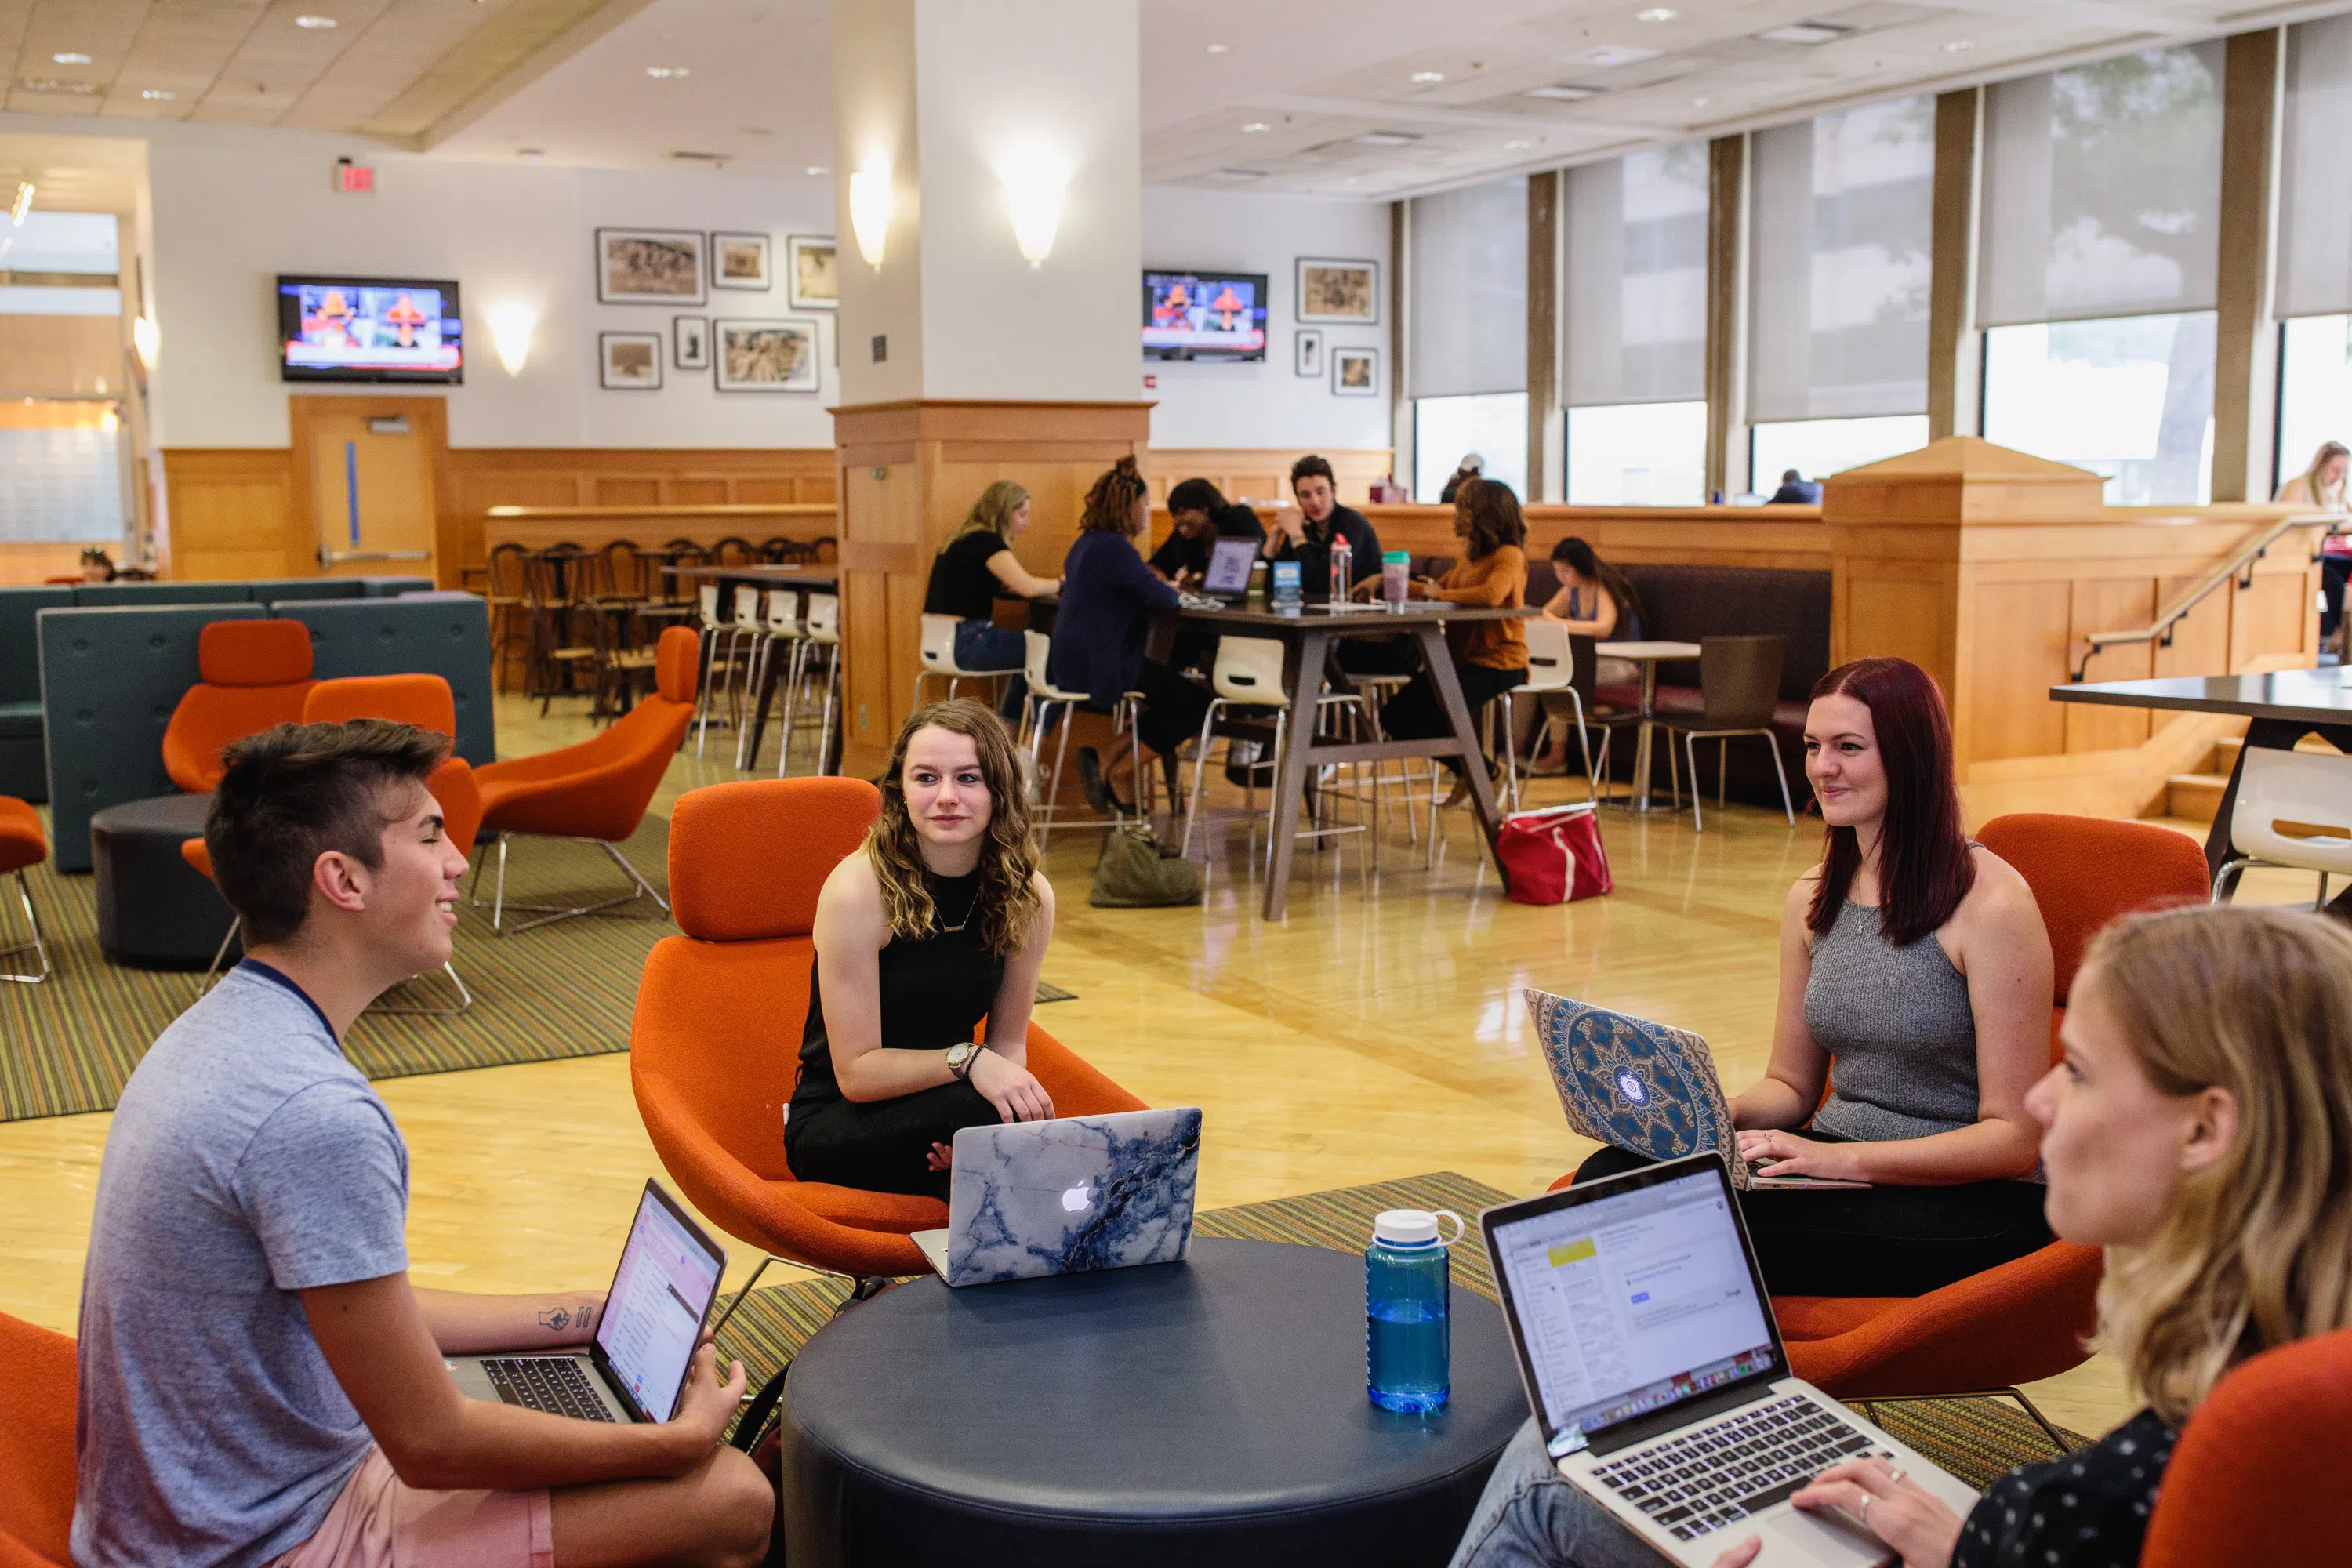 Students working together in the University Student Center study space.